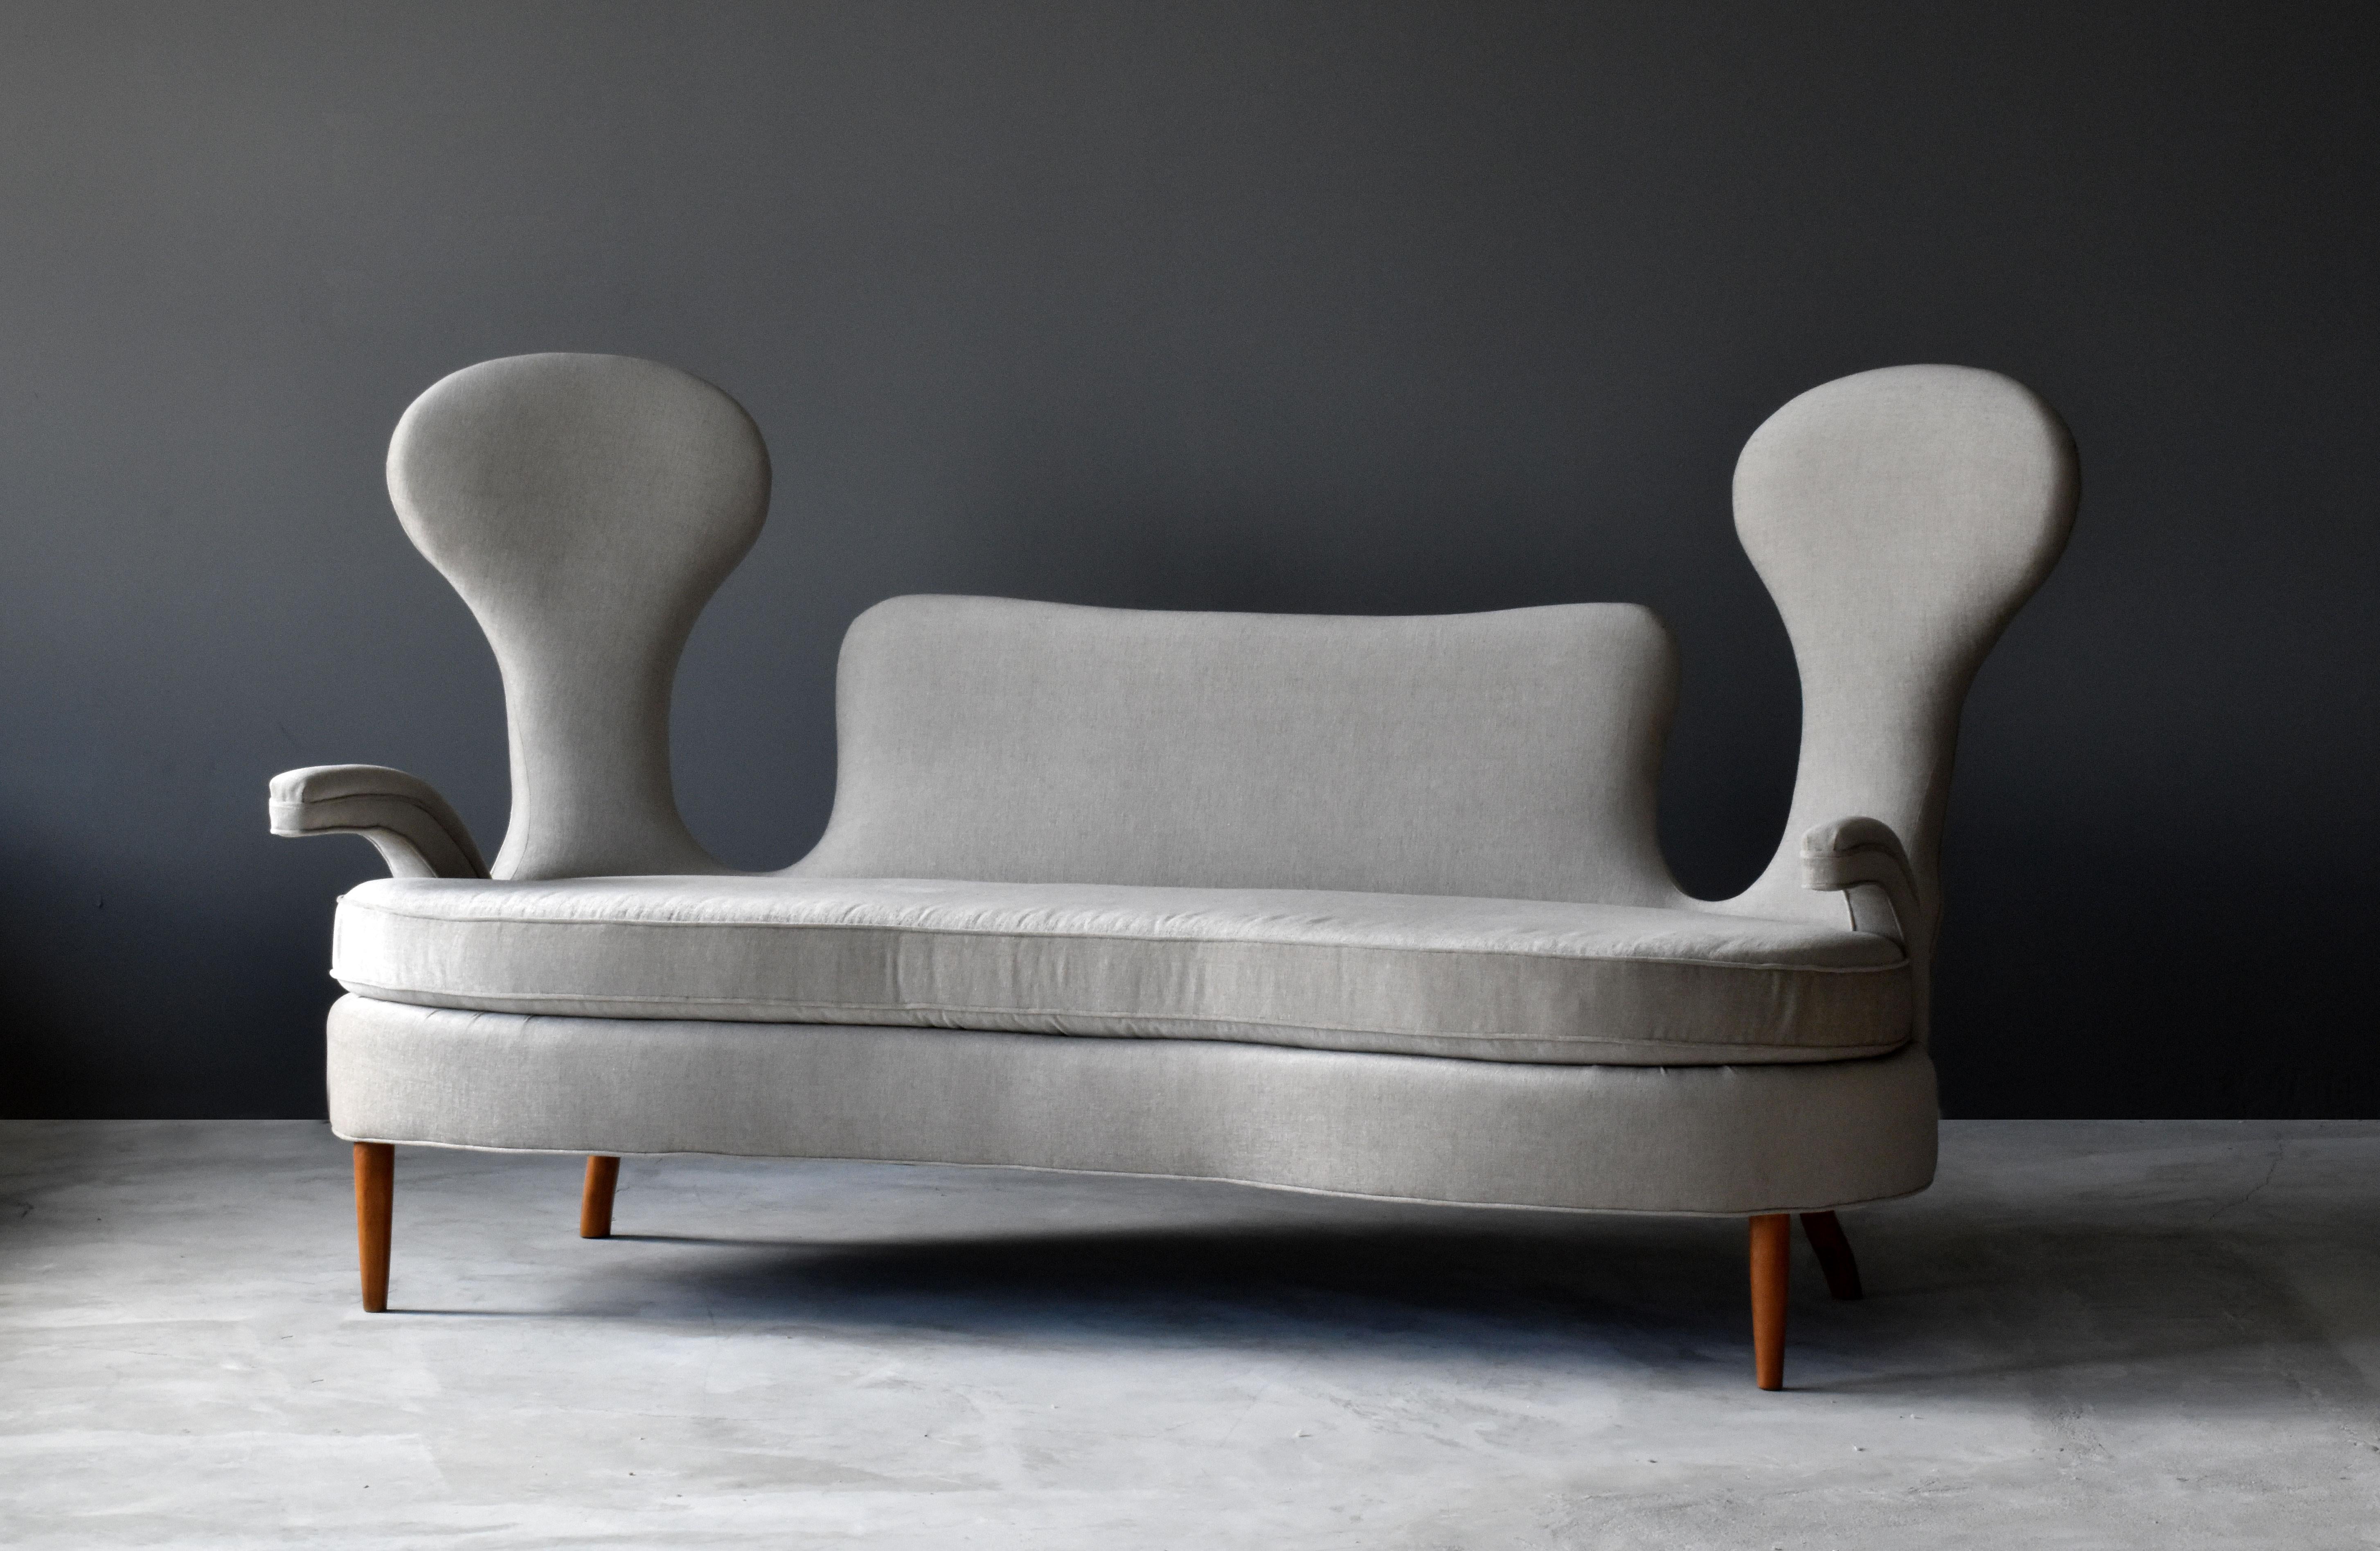 An organic sofa made for hotel San Remo (Rome, Italy), circa 1950, by Italian designer Renzo Zavanella. The design most likely conceived in the latter half of the, 1940s. 

The lively overstuffed form with two high backs provides excellent